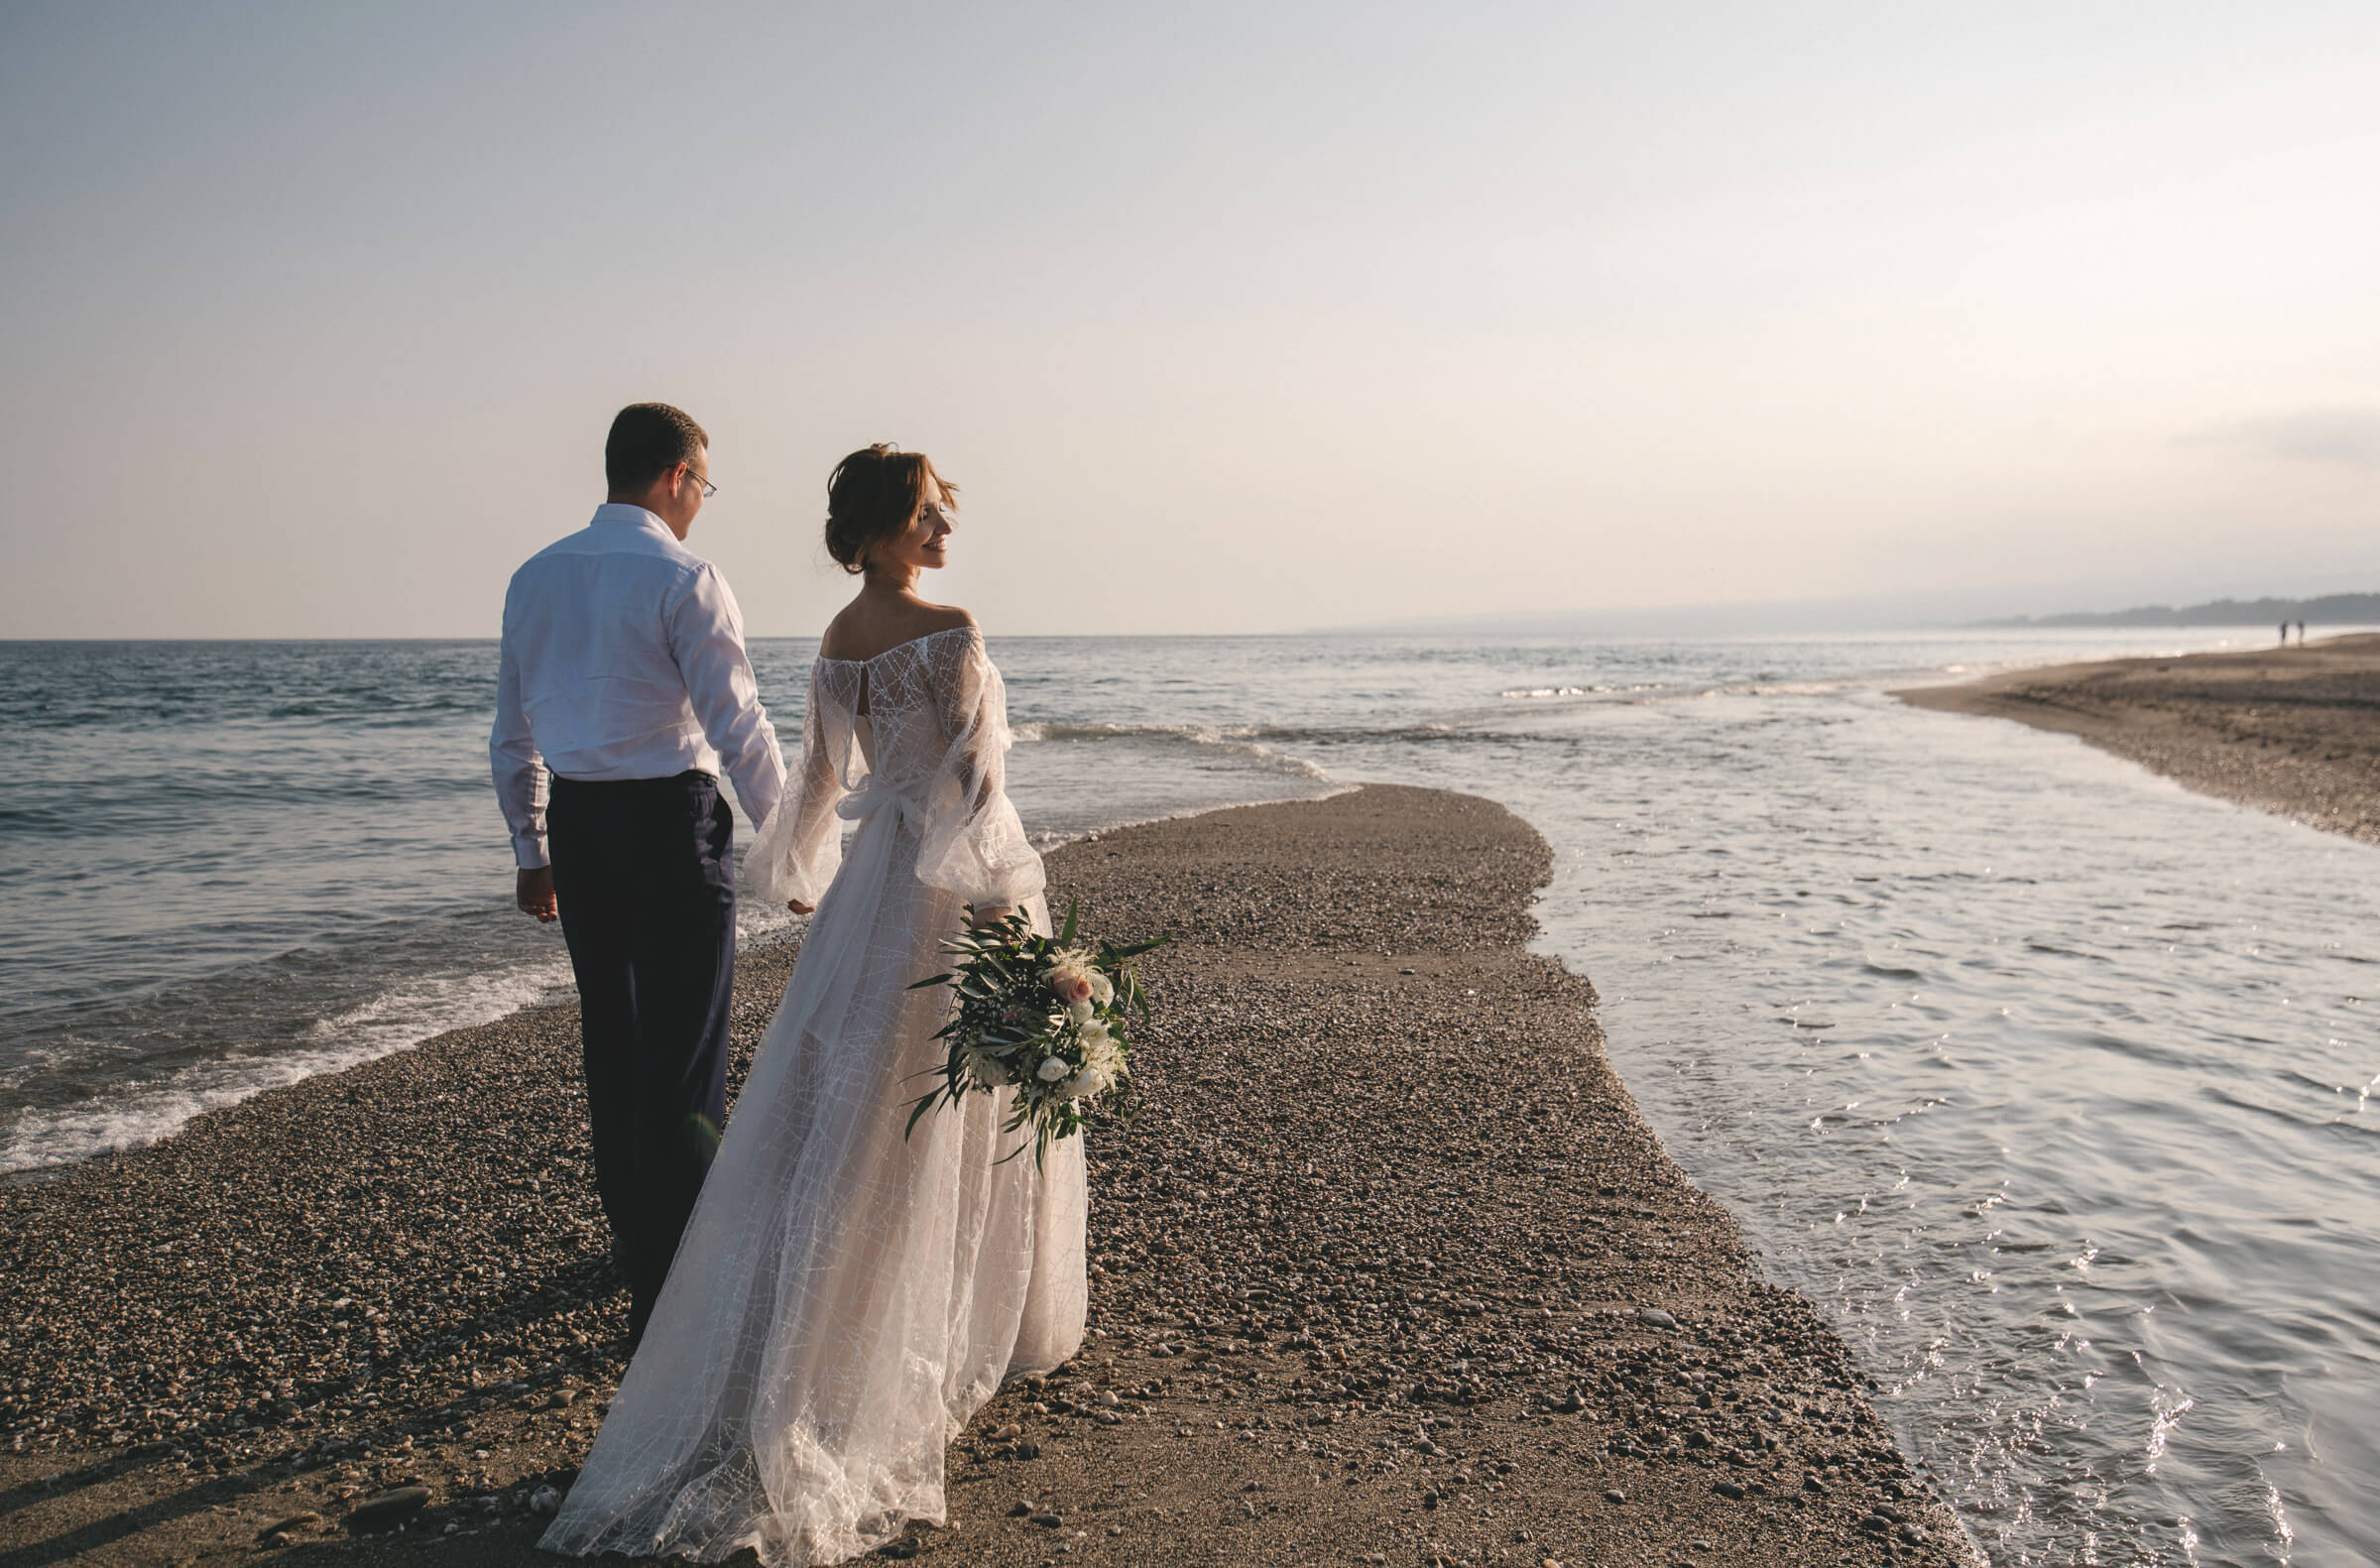 Wedding elopement: history, advantages and tips on planning